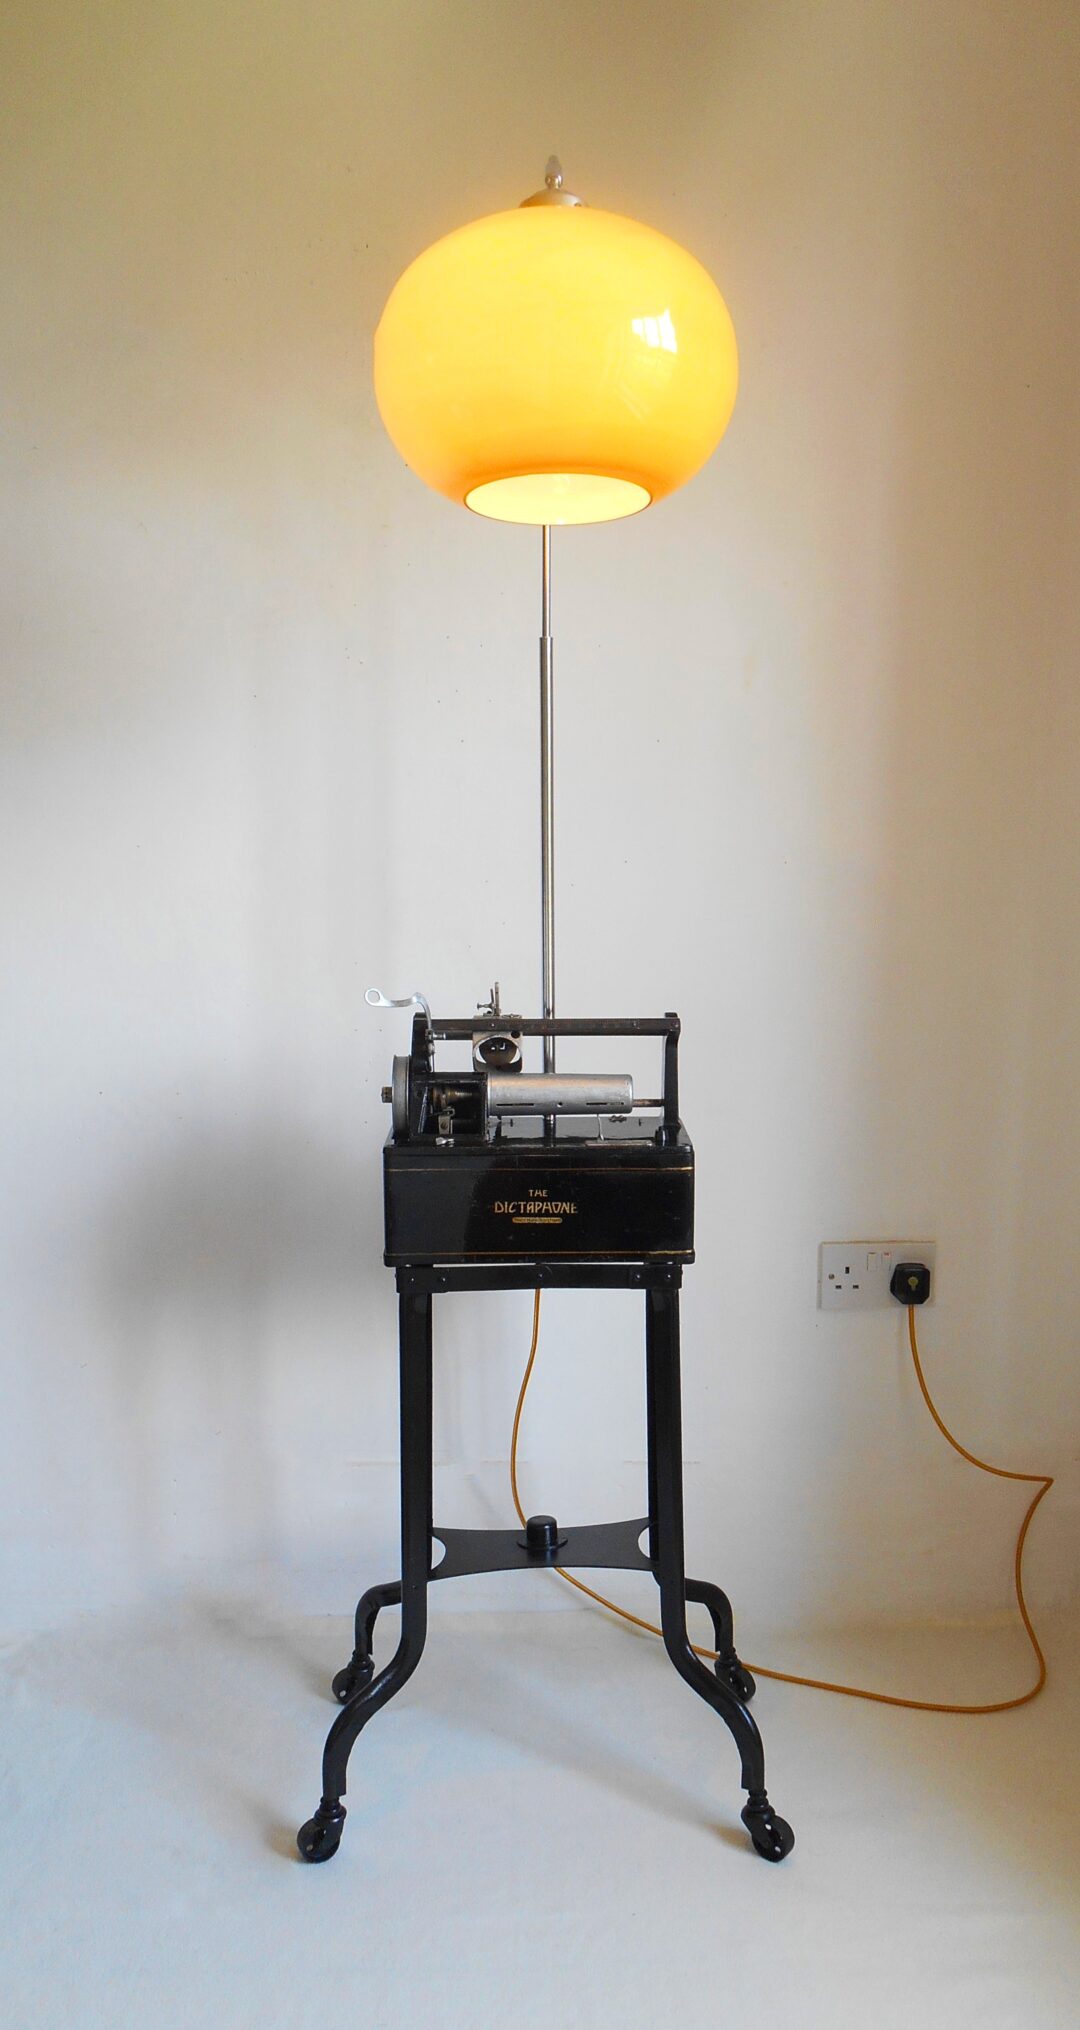 An antique dictaphone repurposed into a floor lamp by Fiona Bradshaw Designs